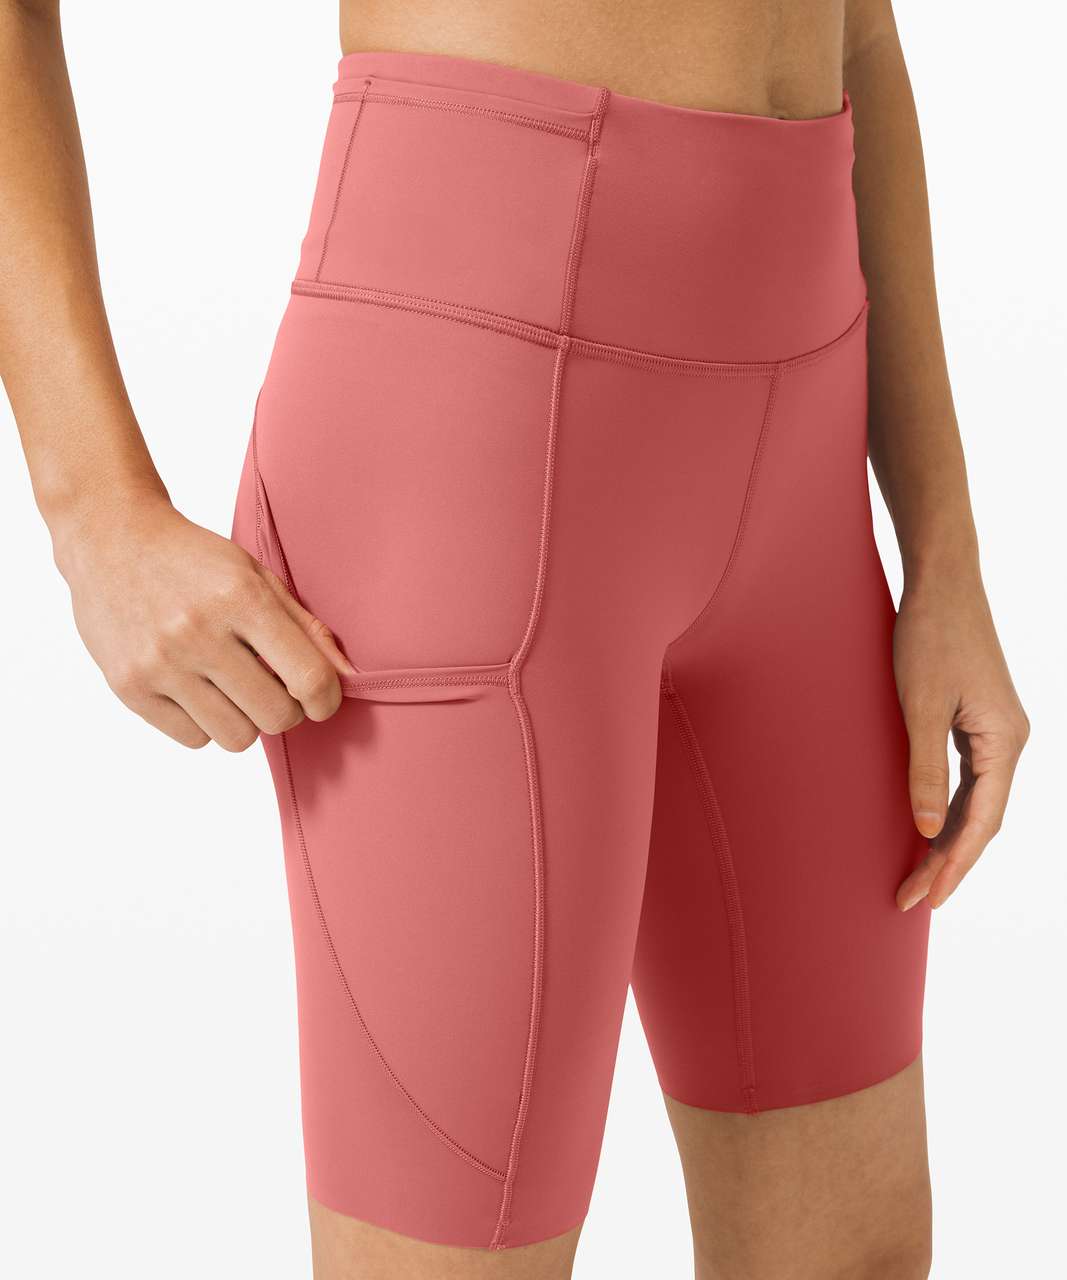 Lululemon Fast And Free Short 10" *Non-Reflective - Cherry Tint